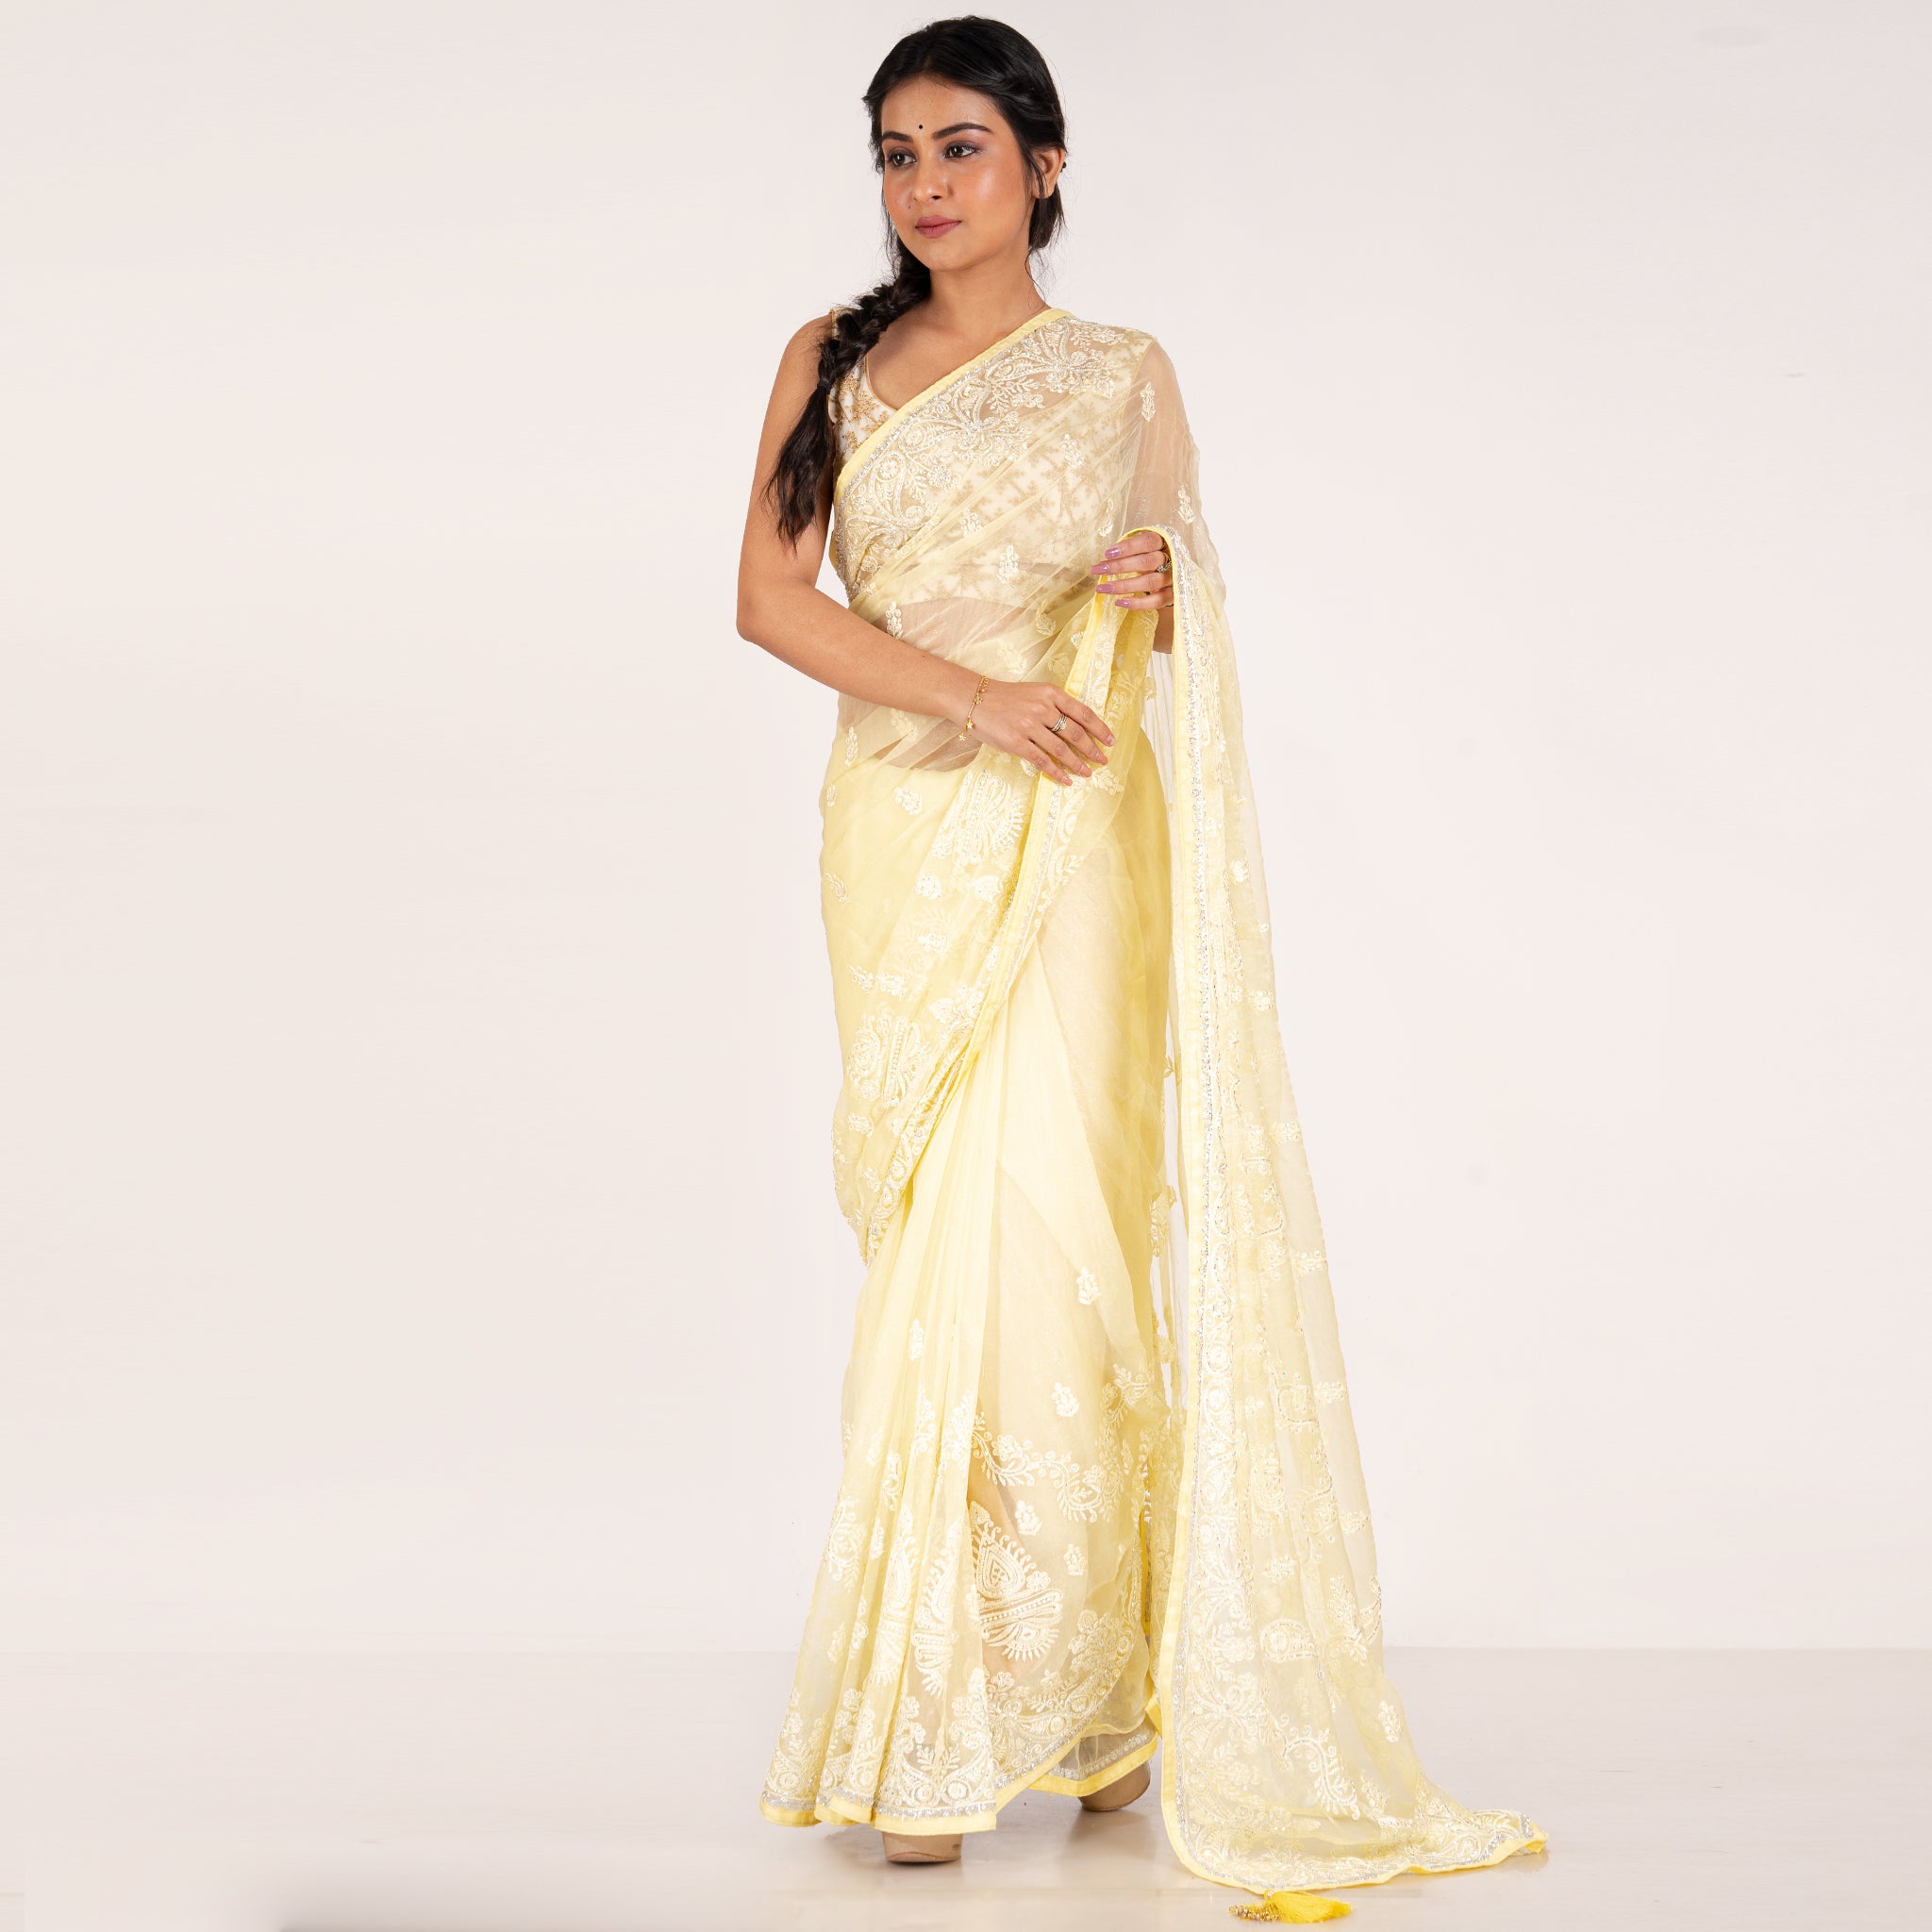 Women's Lime Yellow Pure Chiffon Fully Embroidered Saree With Crystalisation - Boveee